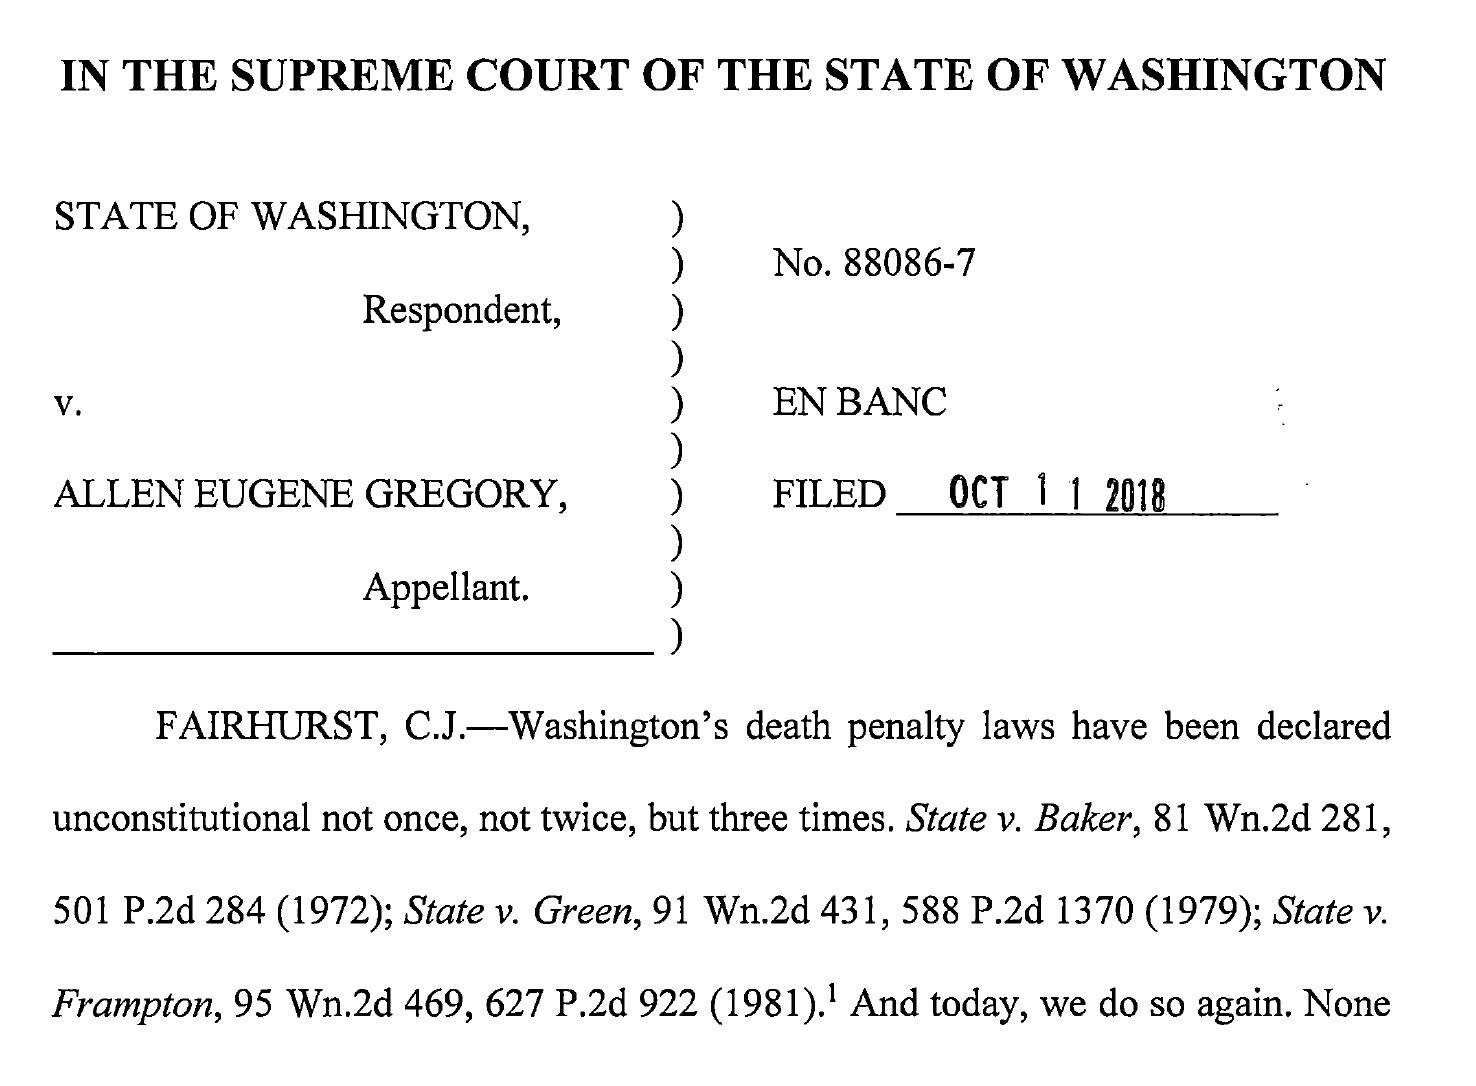 The Washington state Supreme Court ruled in a unanimous decision on Oct. 11 that the death penalty is “invalid” and “unconstitutional.”